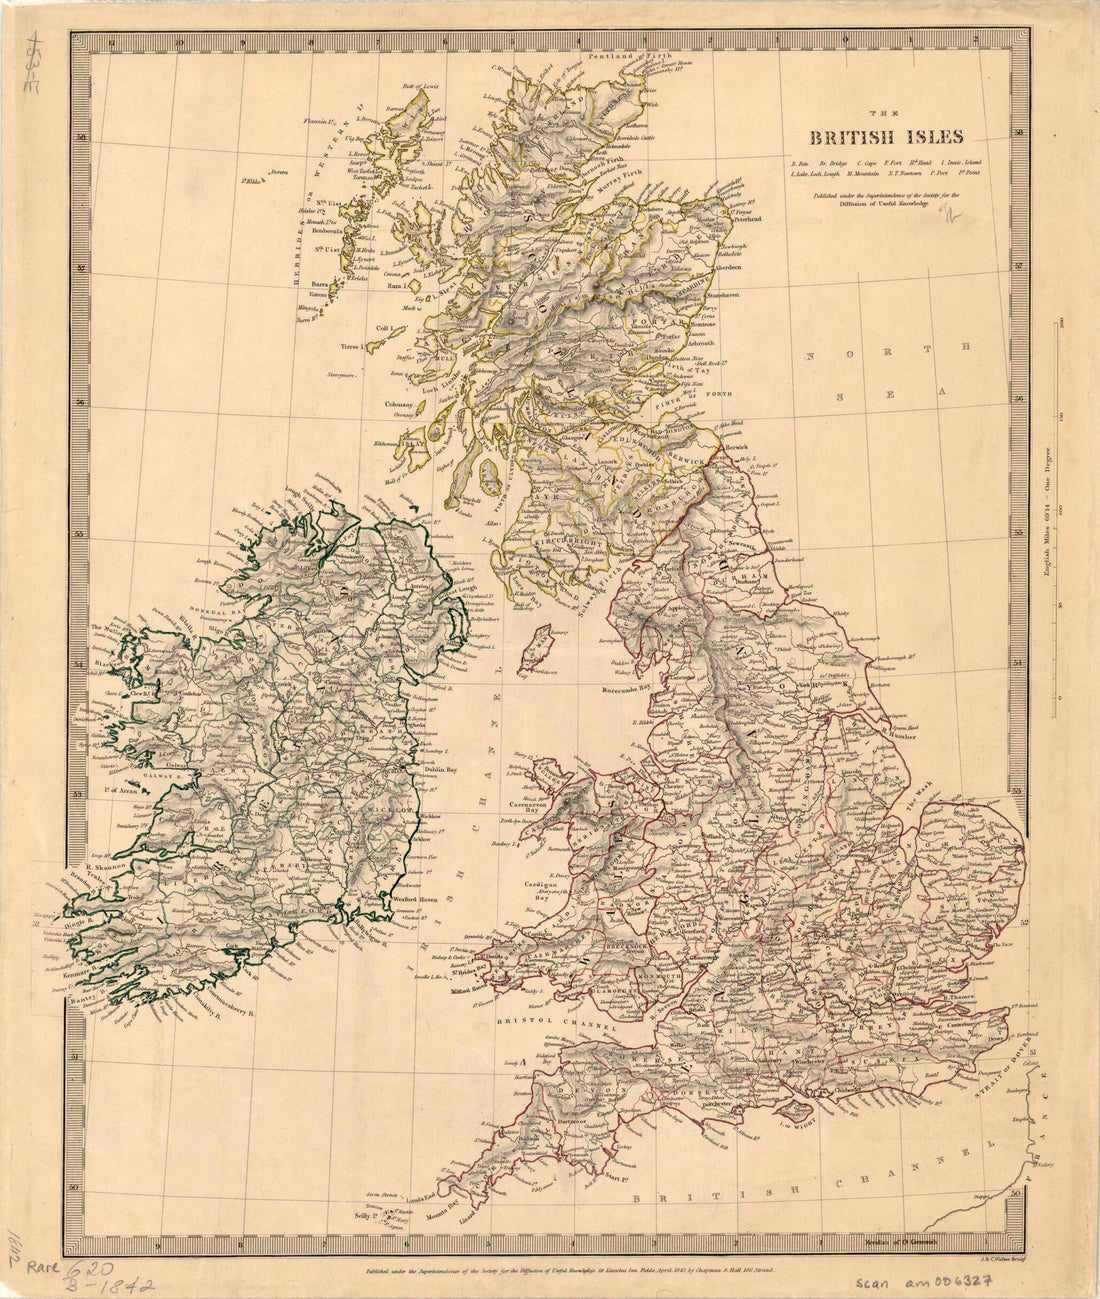 This old map of The British Isles from 1842 was created by  J. &amp; C. Walker,  Society for the Diffusion of Useful Knowledge (Great Britain) in 1842